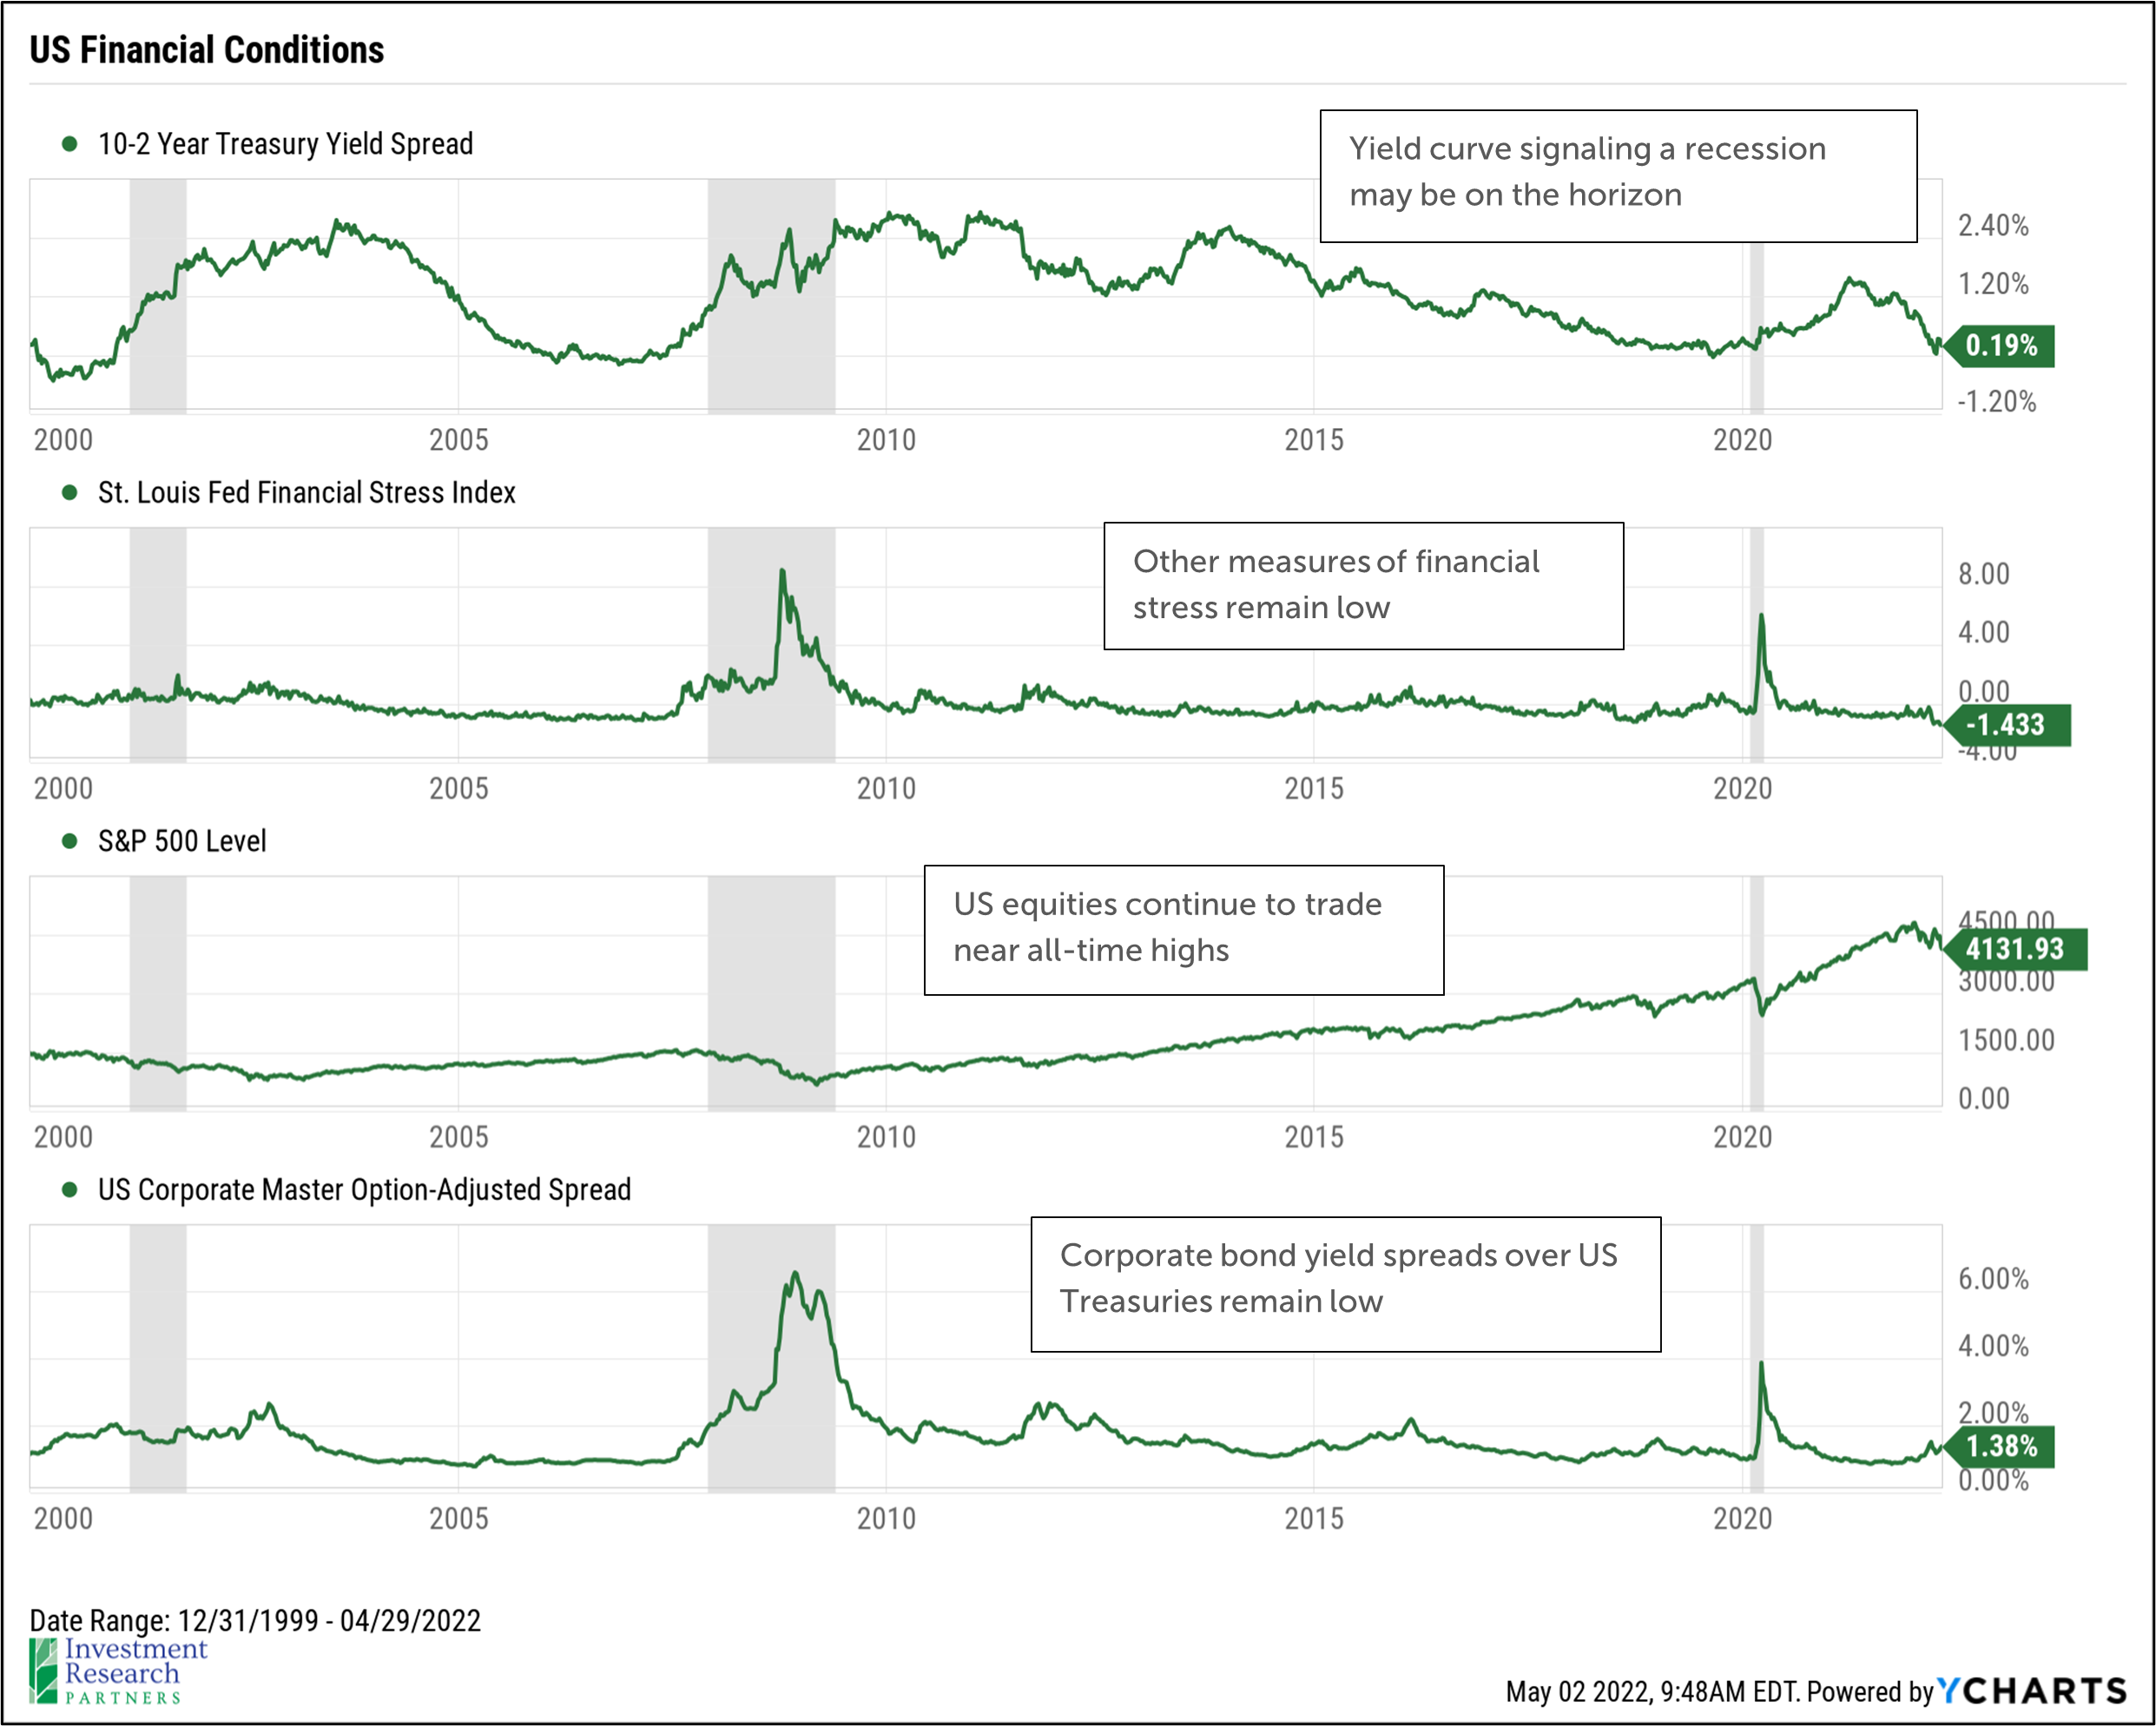 Line graphs depicting US Financial Conditions